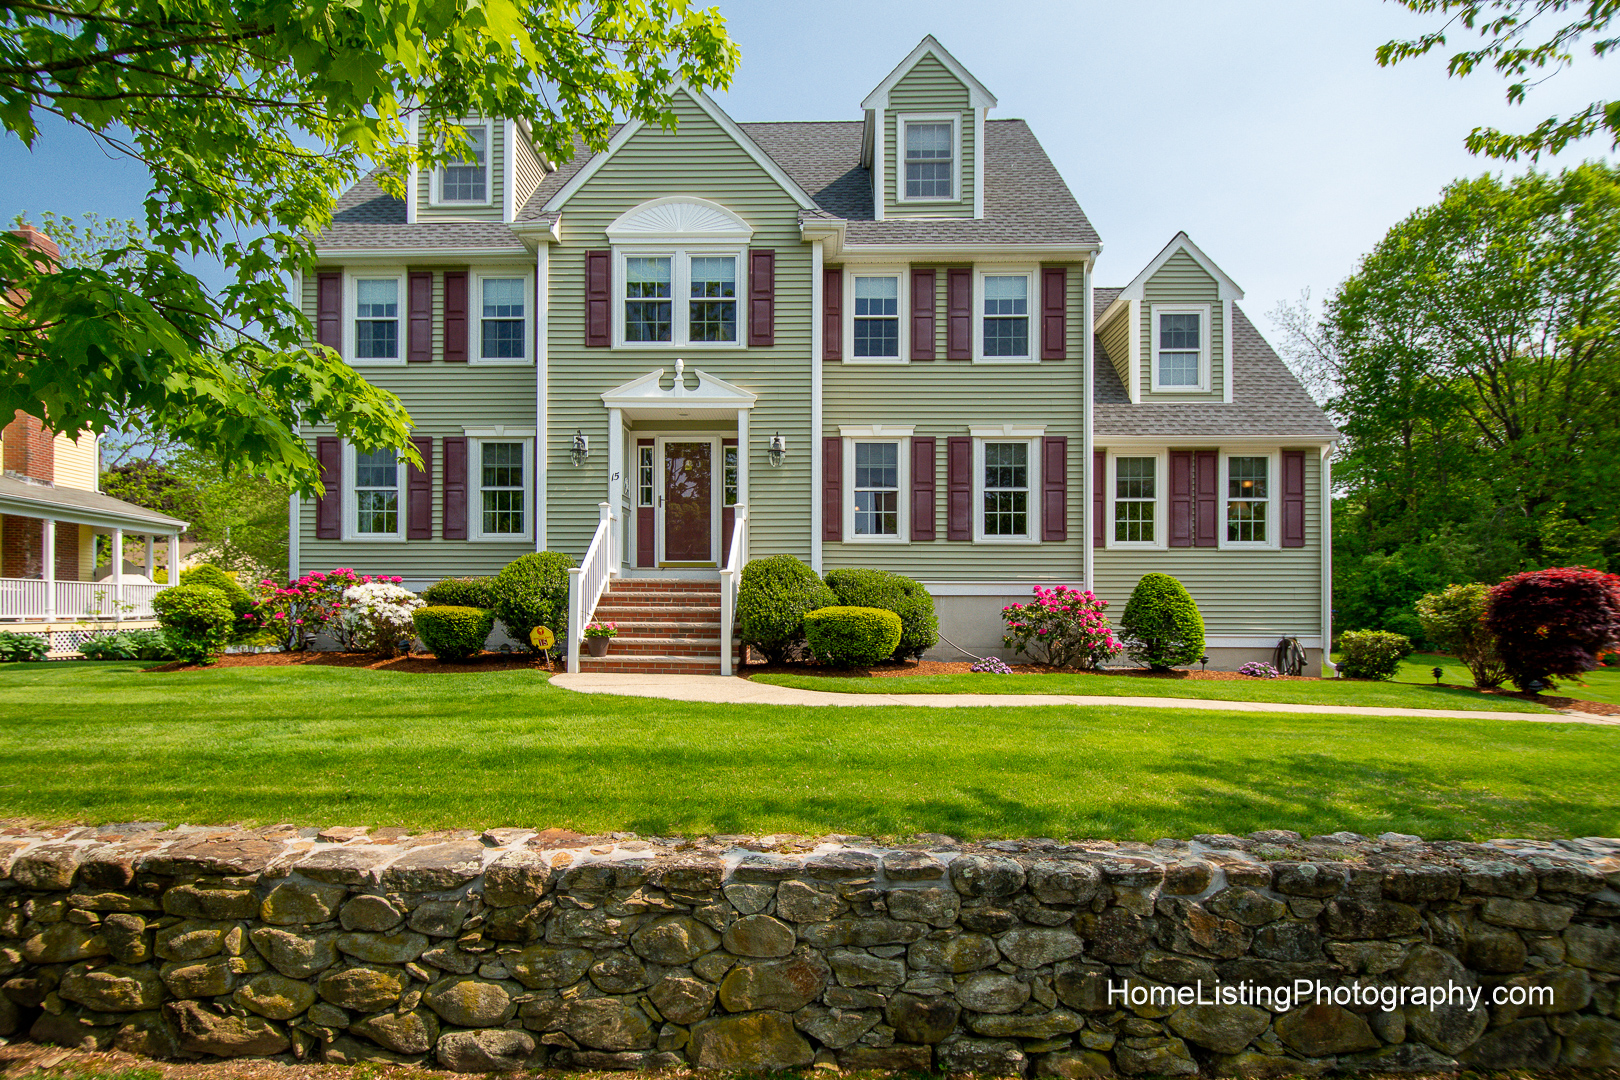 Thomas Adach - Woburn MA professional real estate photographer - 508-655-2225 Home Listing Photography